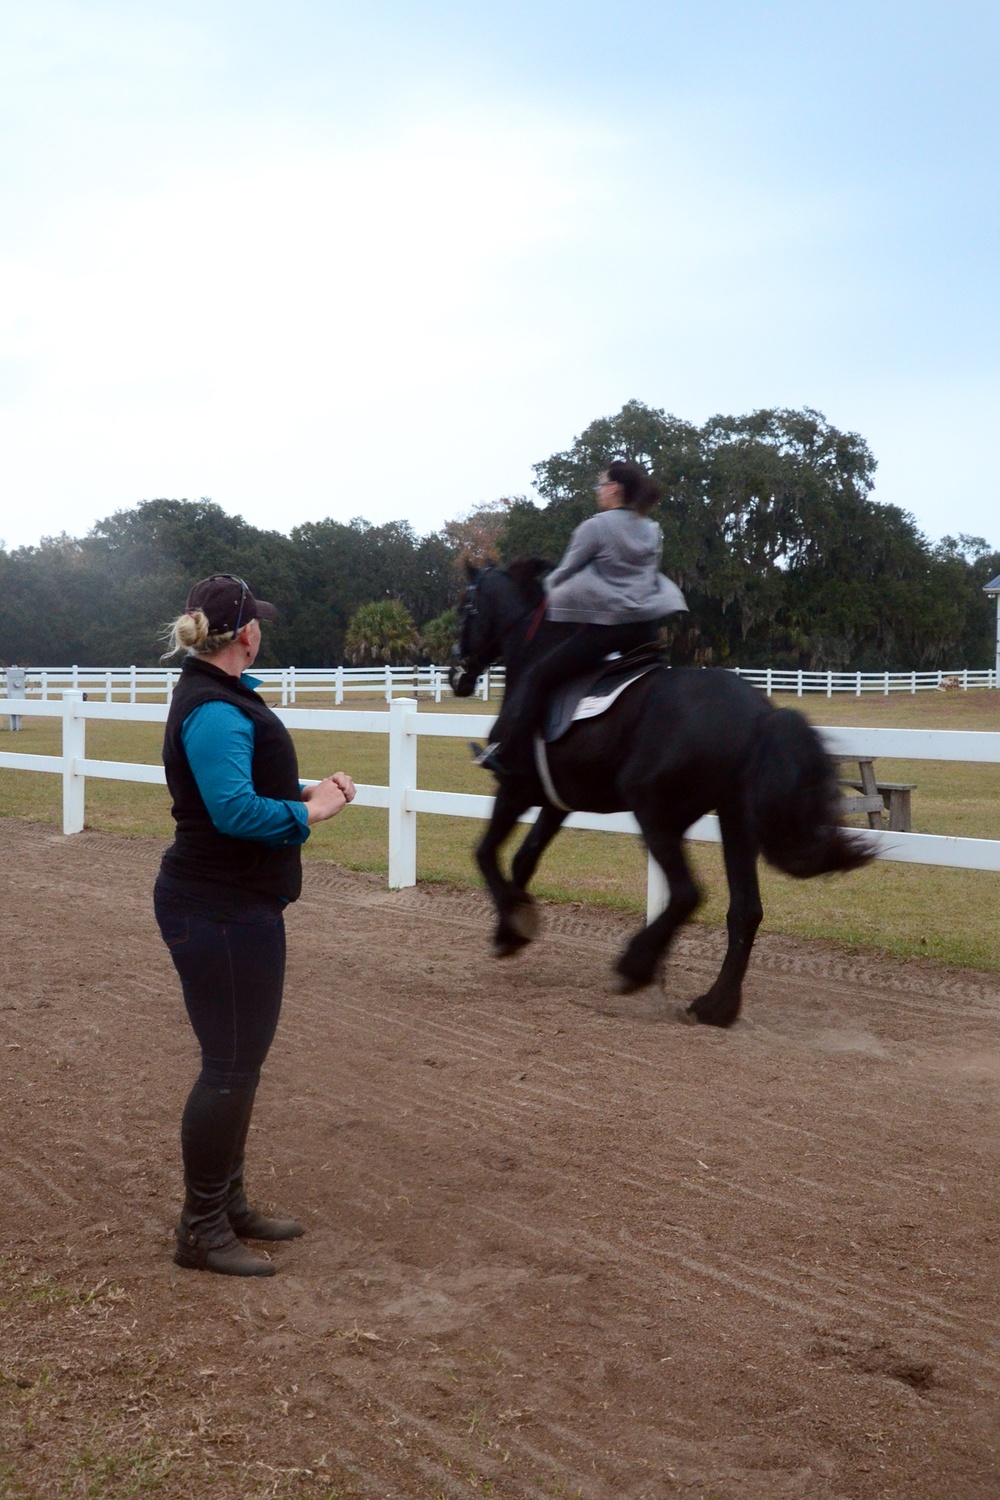 Horse trainer and Army wife: one woman's perfect balance